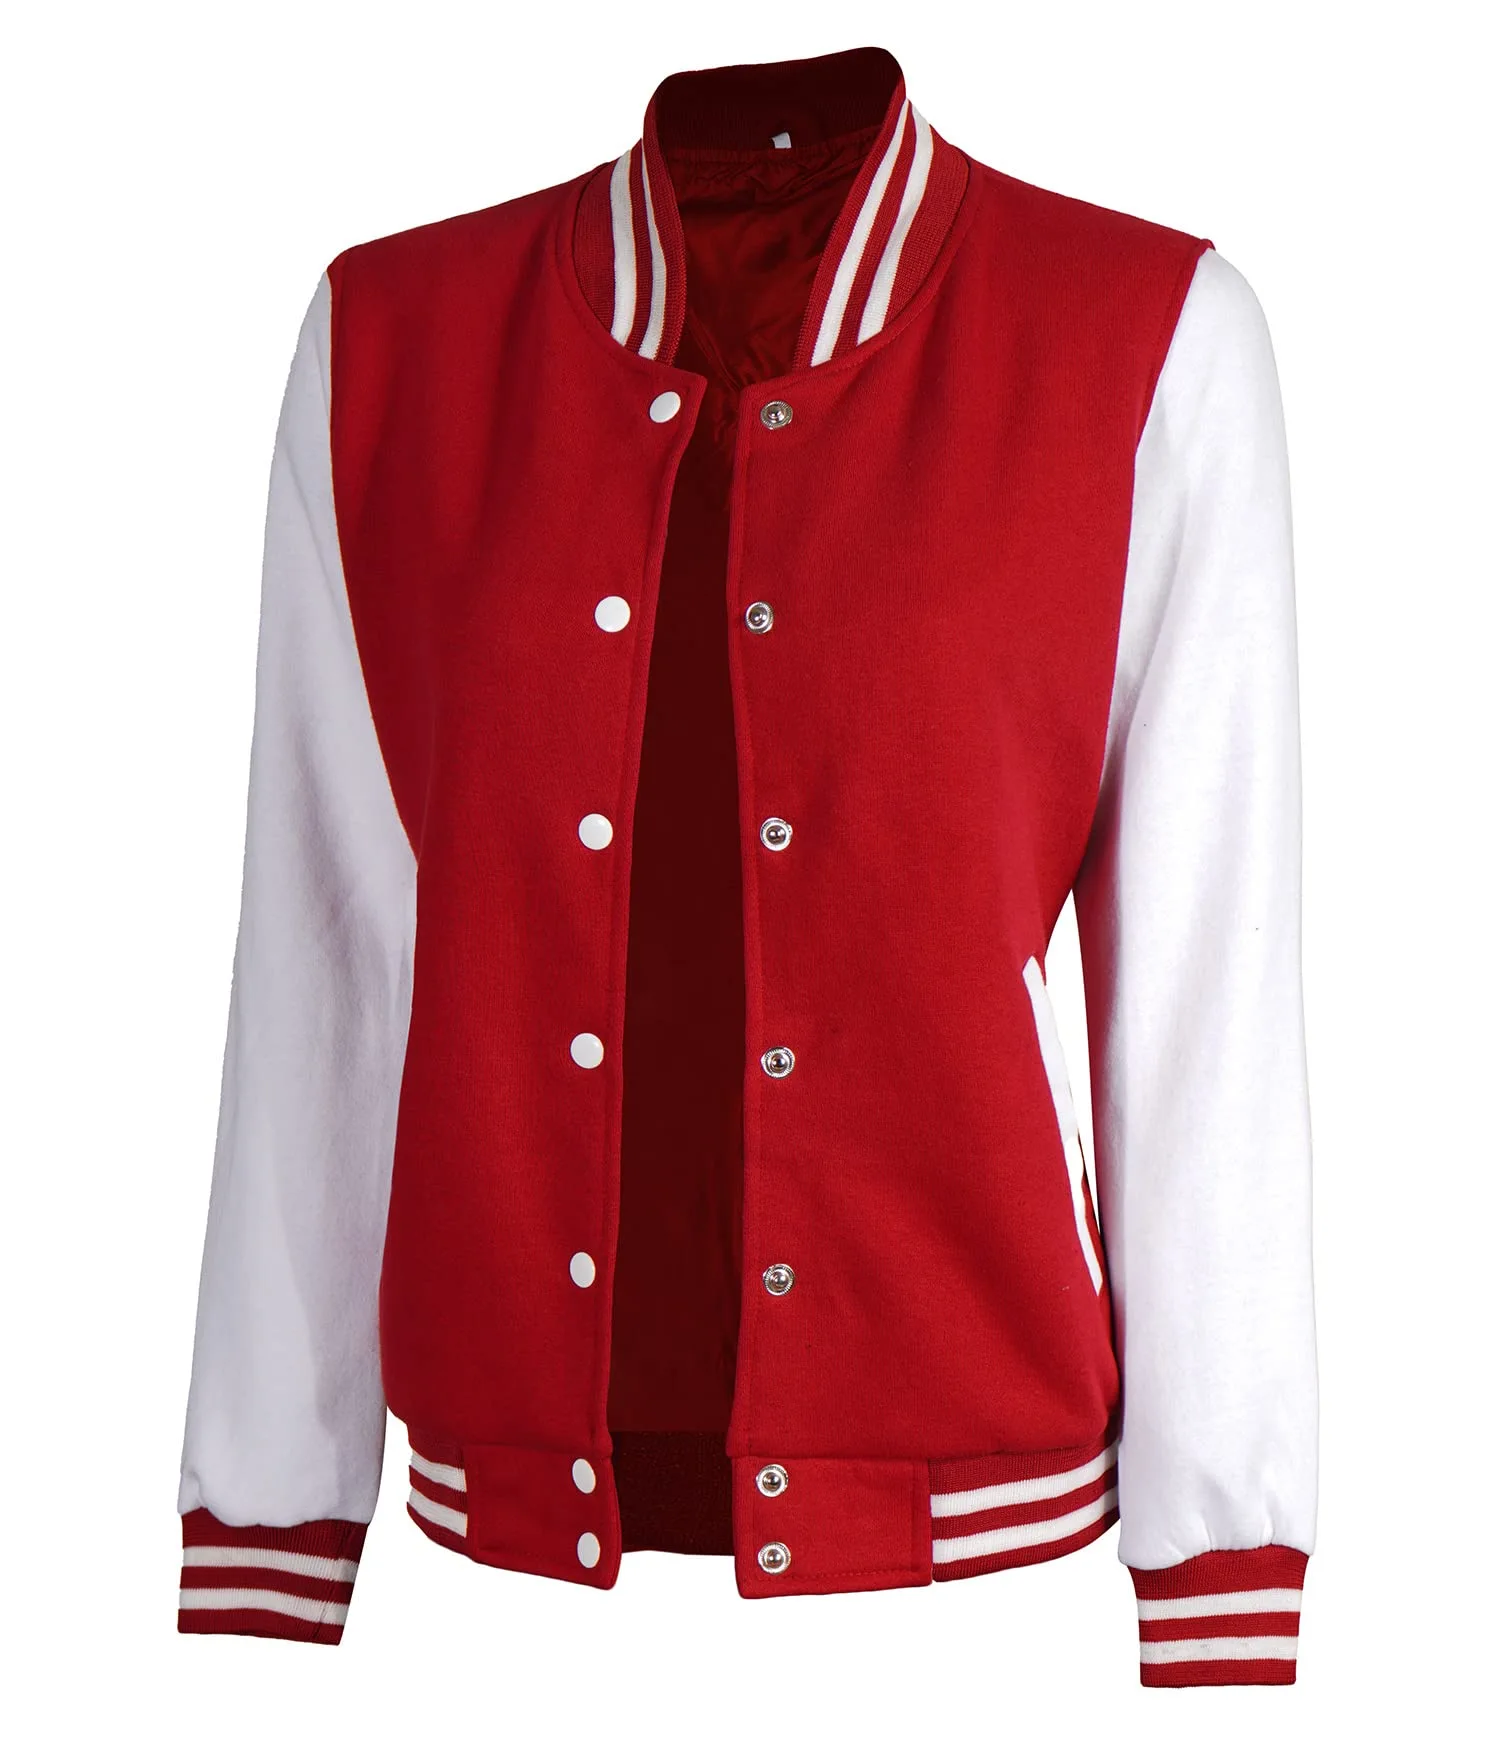 red-white-quilted-bomber-varsity-jacket-for-womens